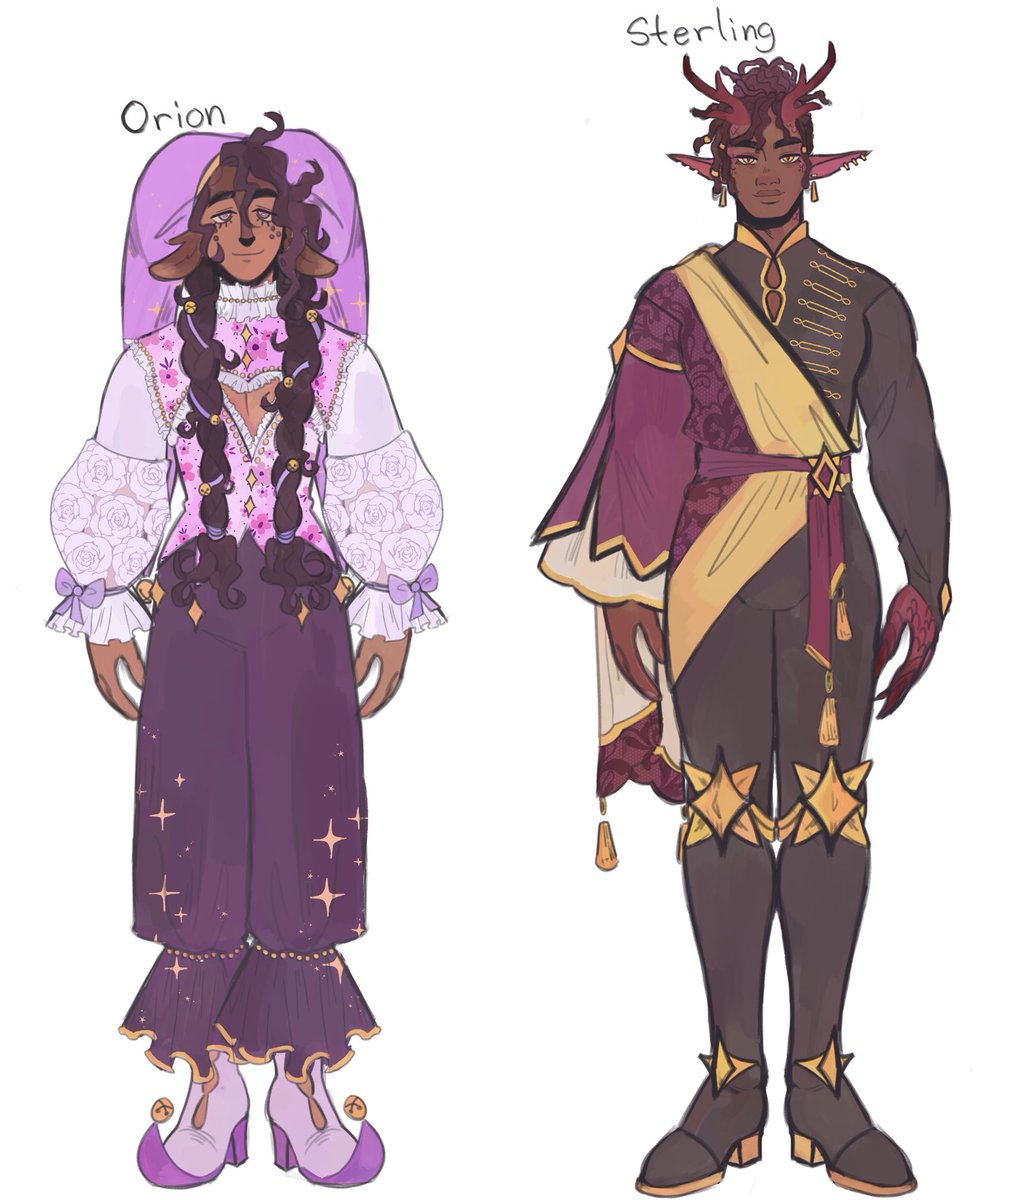 New ocs :3 a prince and his jester